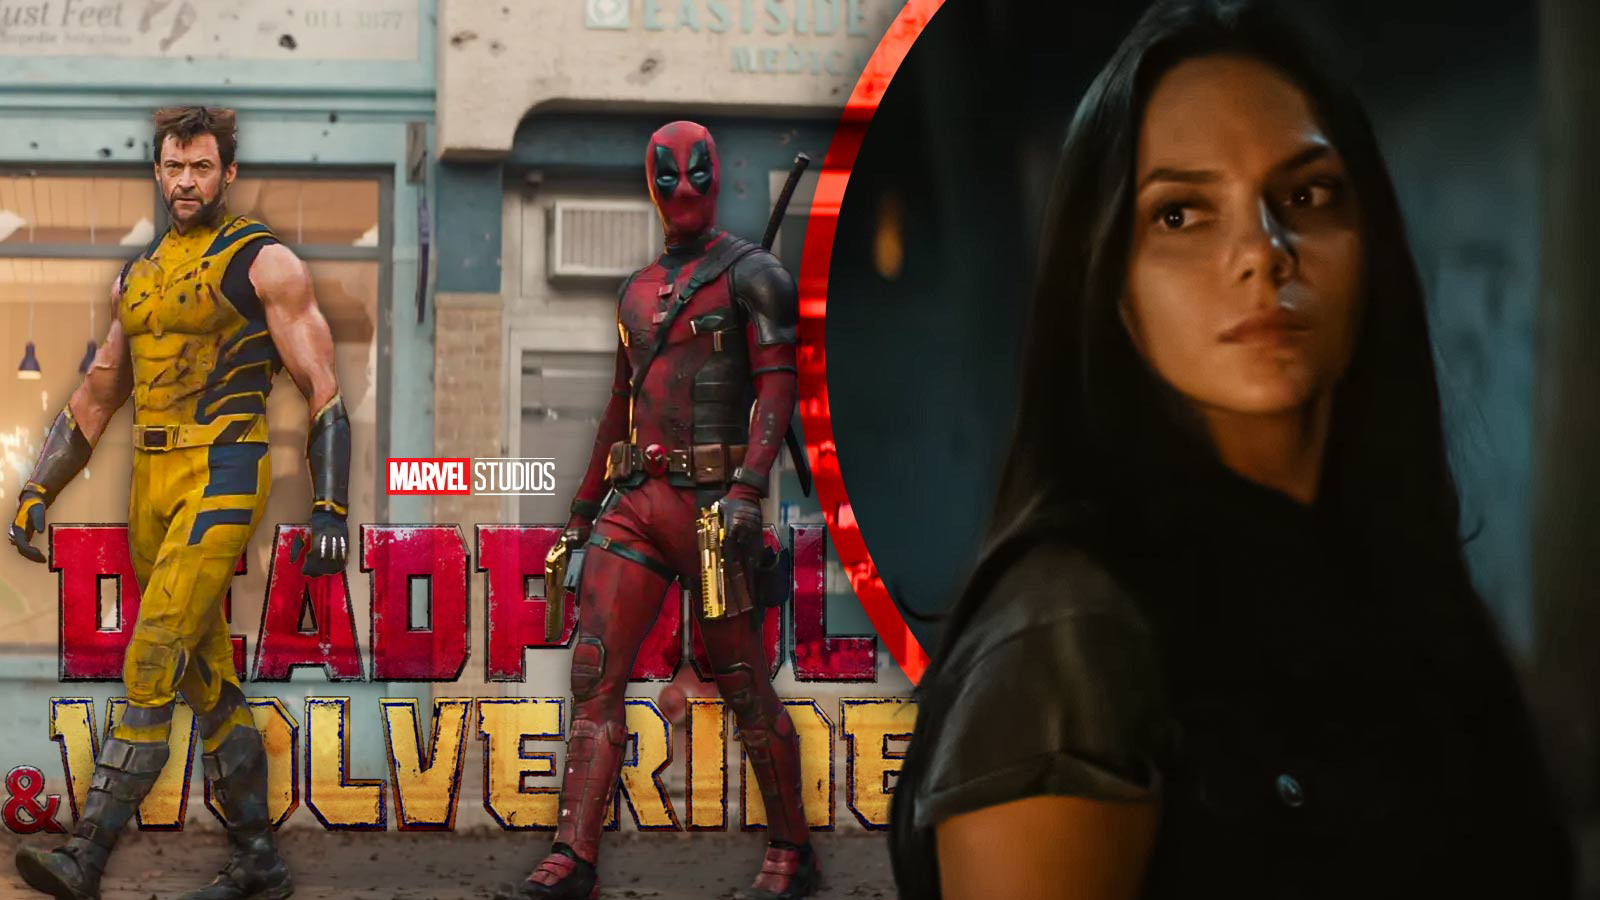 “He is the master at this”: Deadpool & Wolverine Star Dafne Keen Took a Page Out of One Marvel Star’s Playbook to Hide Her Role in the Movie Until the Big Reveal